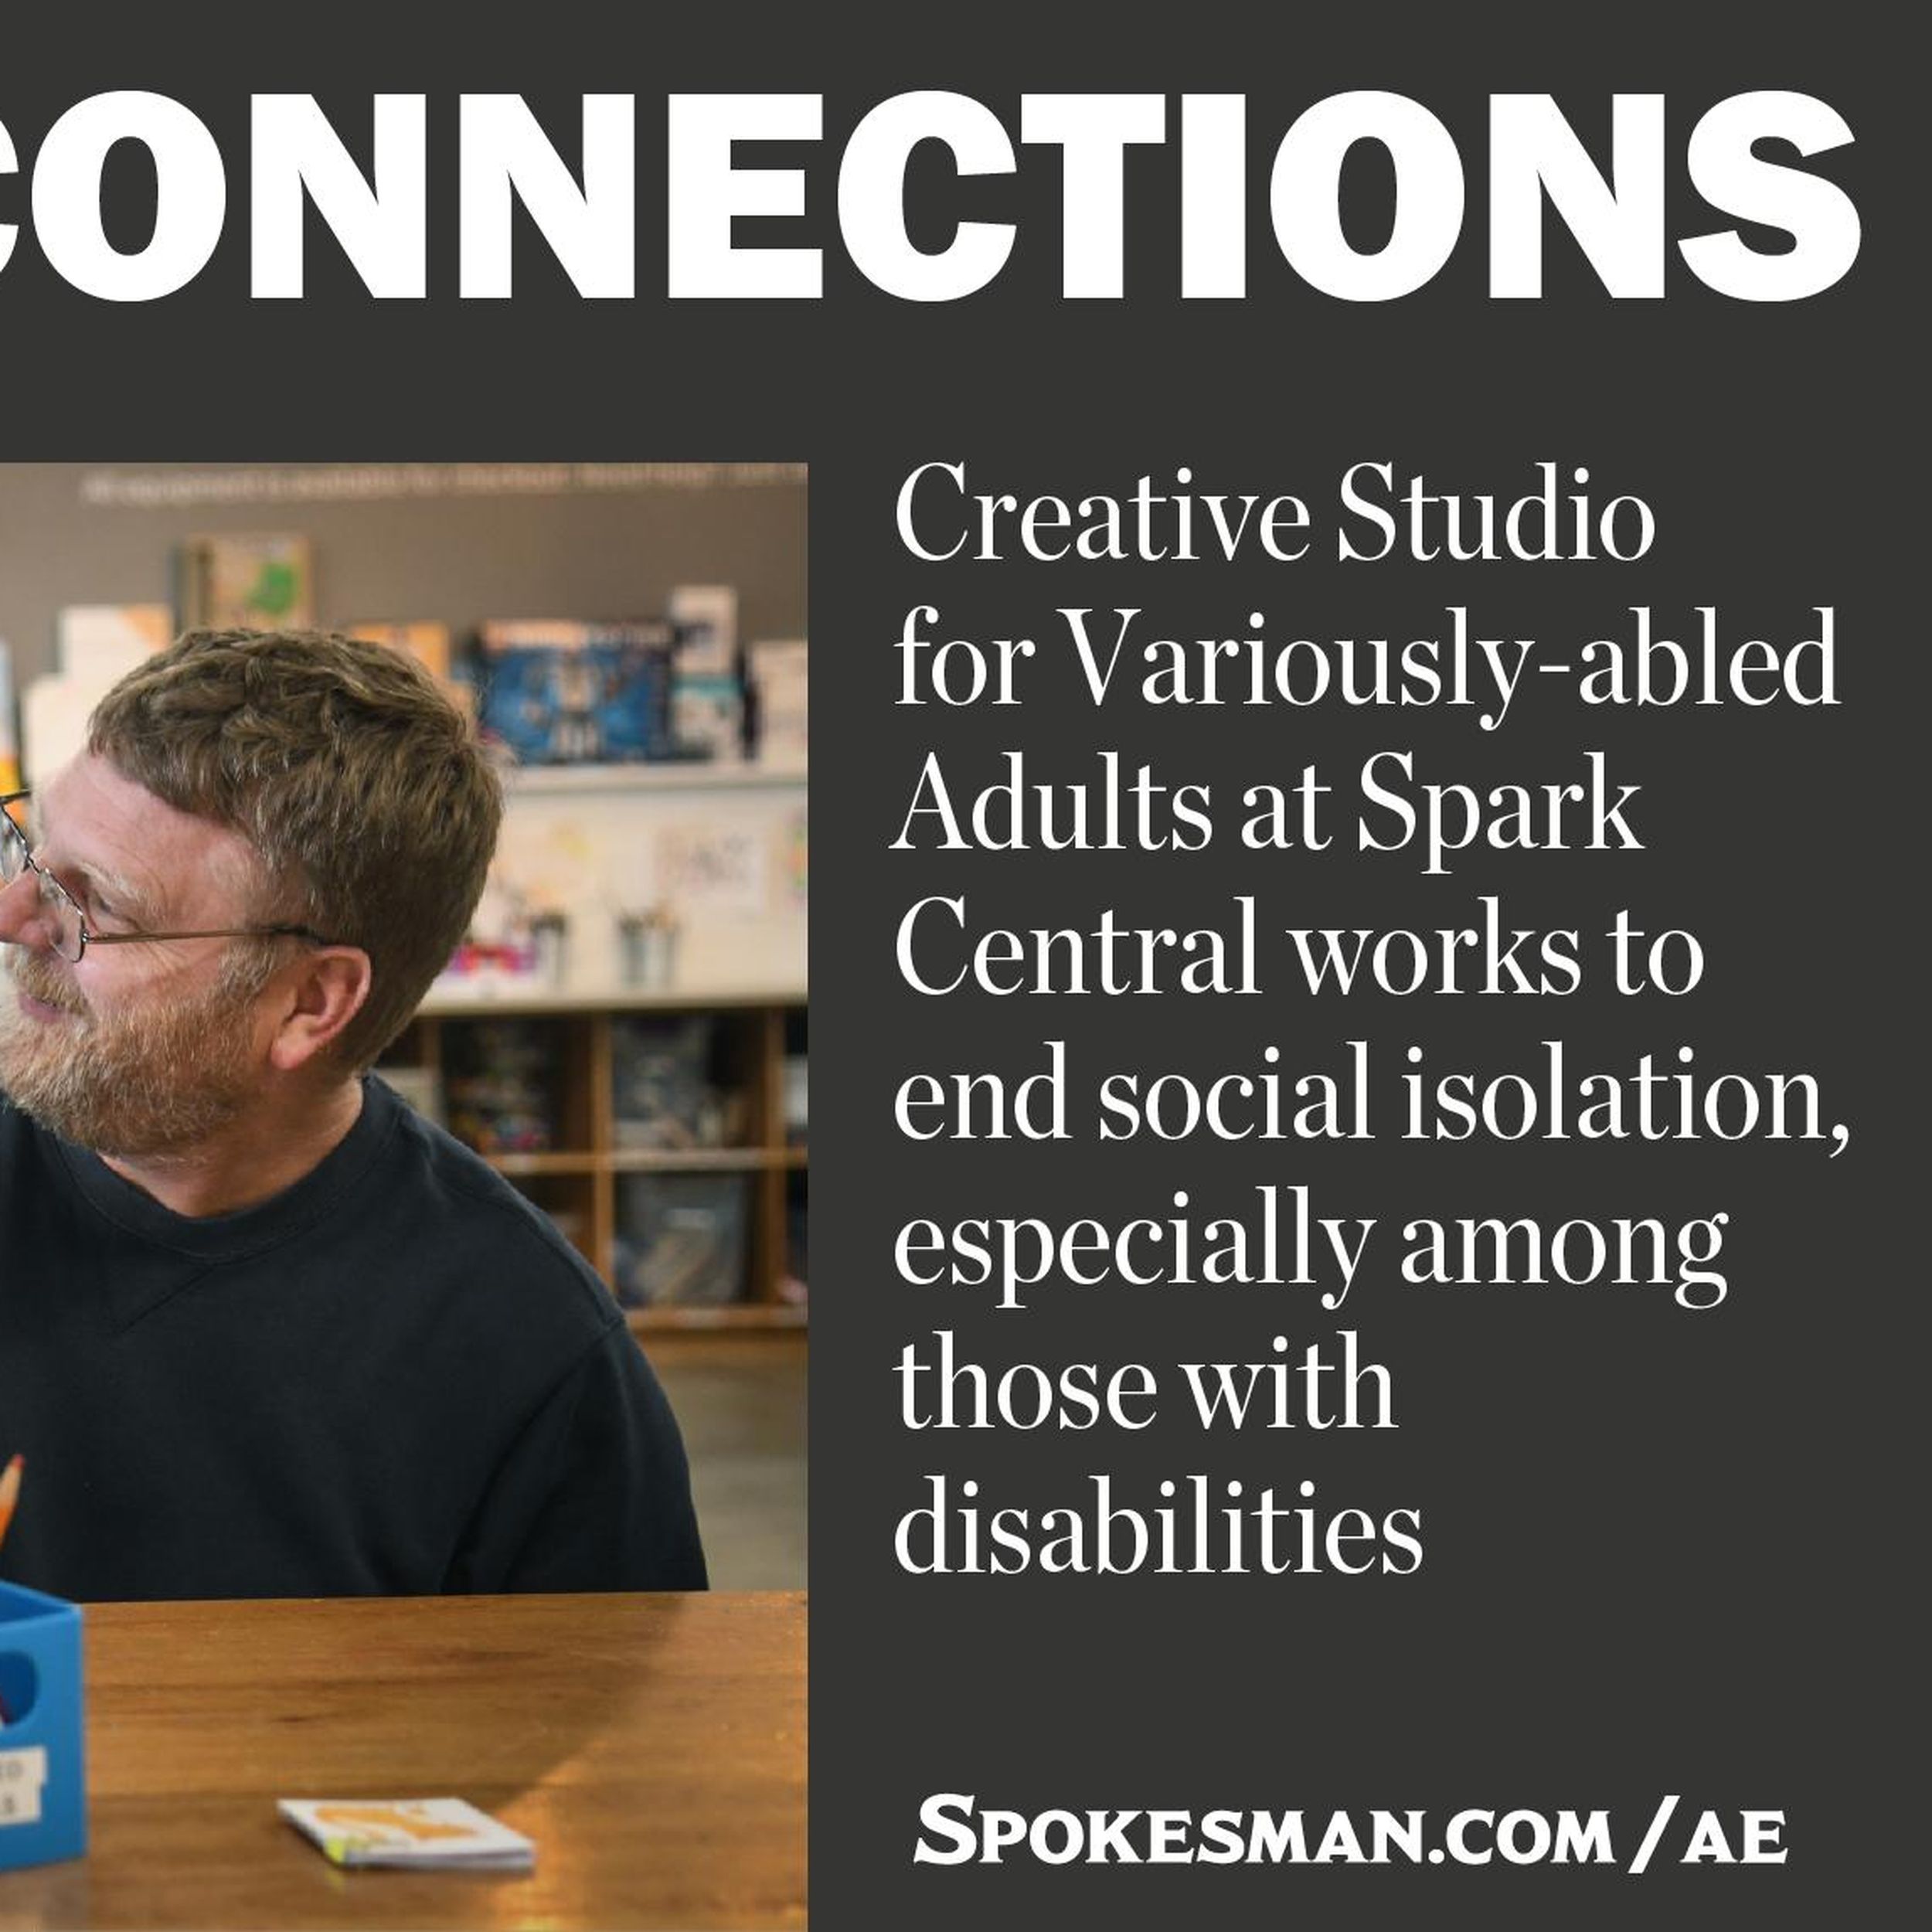 Connecting people with disabilities, Spark